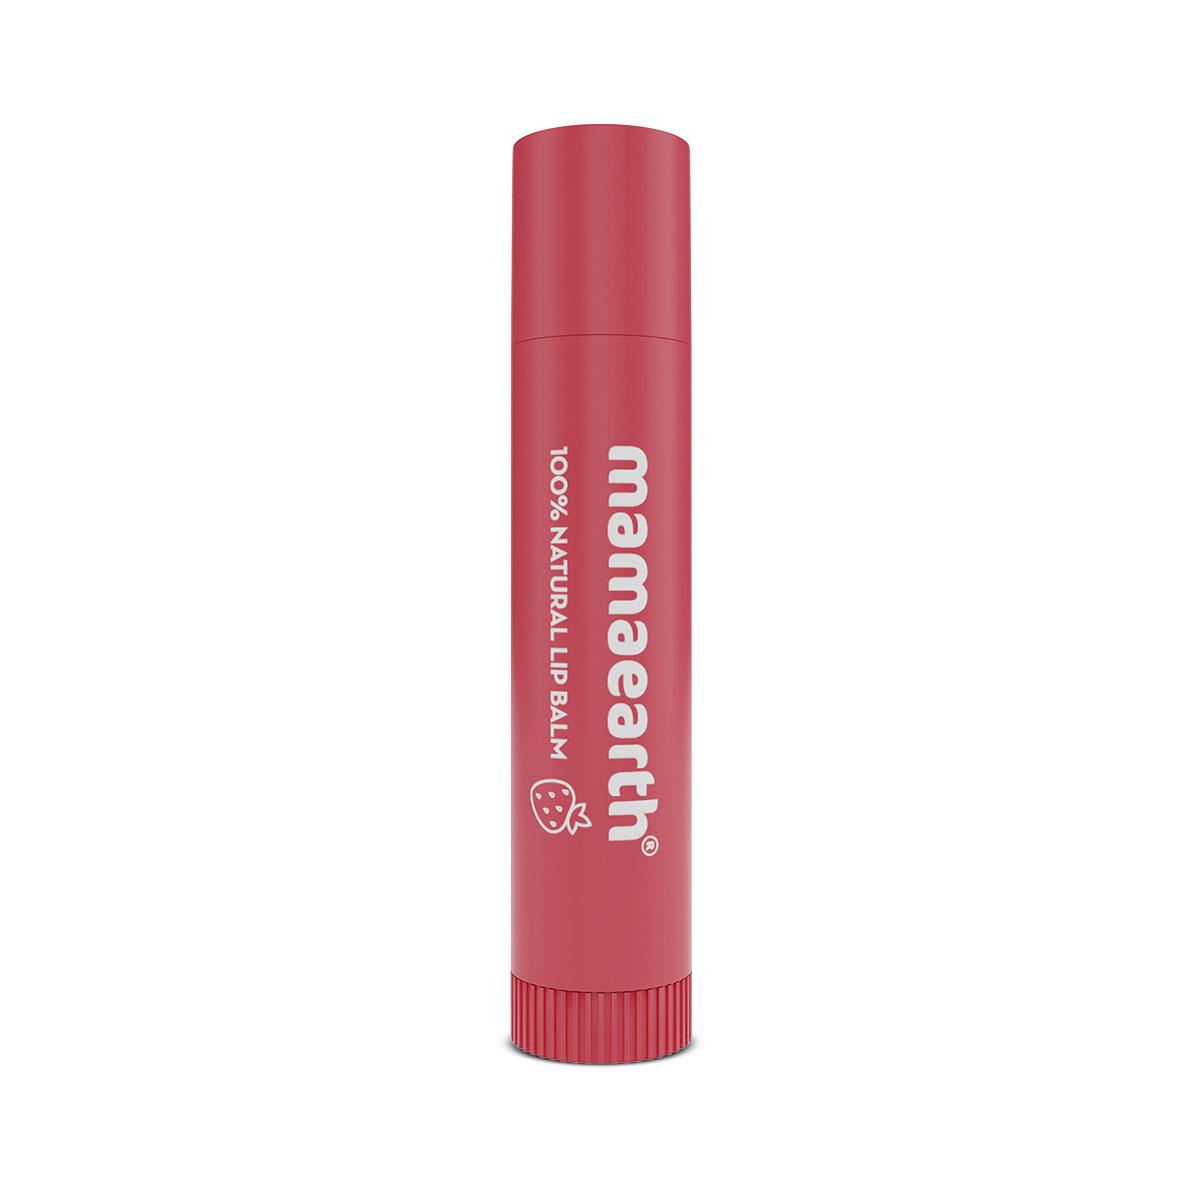 nourishing tinted 100% natural lip balm with vitamin e and strawberry for dry & chapped lips - 4 g